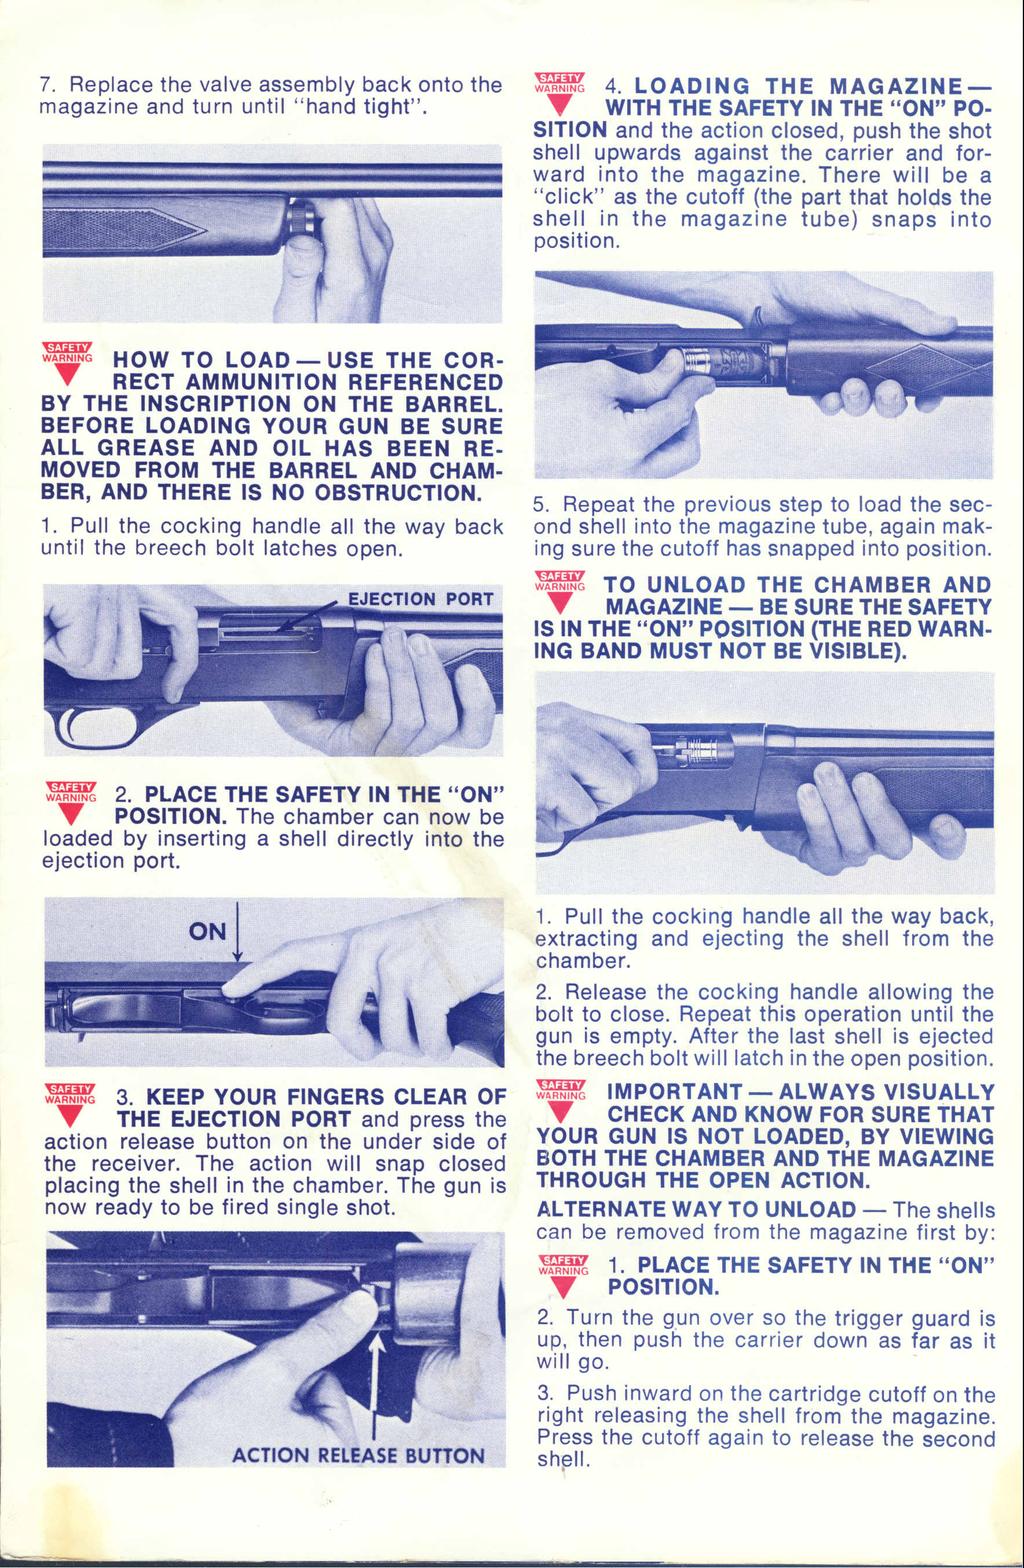 7. Replace the valve assembly back onto the magazine and turn until "hand tight". l"' HOW TO LOAD - USE THE COR- T RECT AMMUNITION REFERENCED BY THE INSCRIPTION ON THE BARREL.